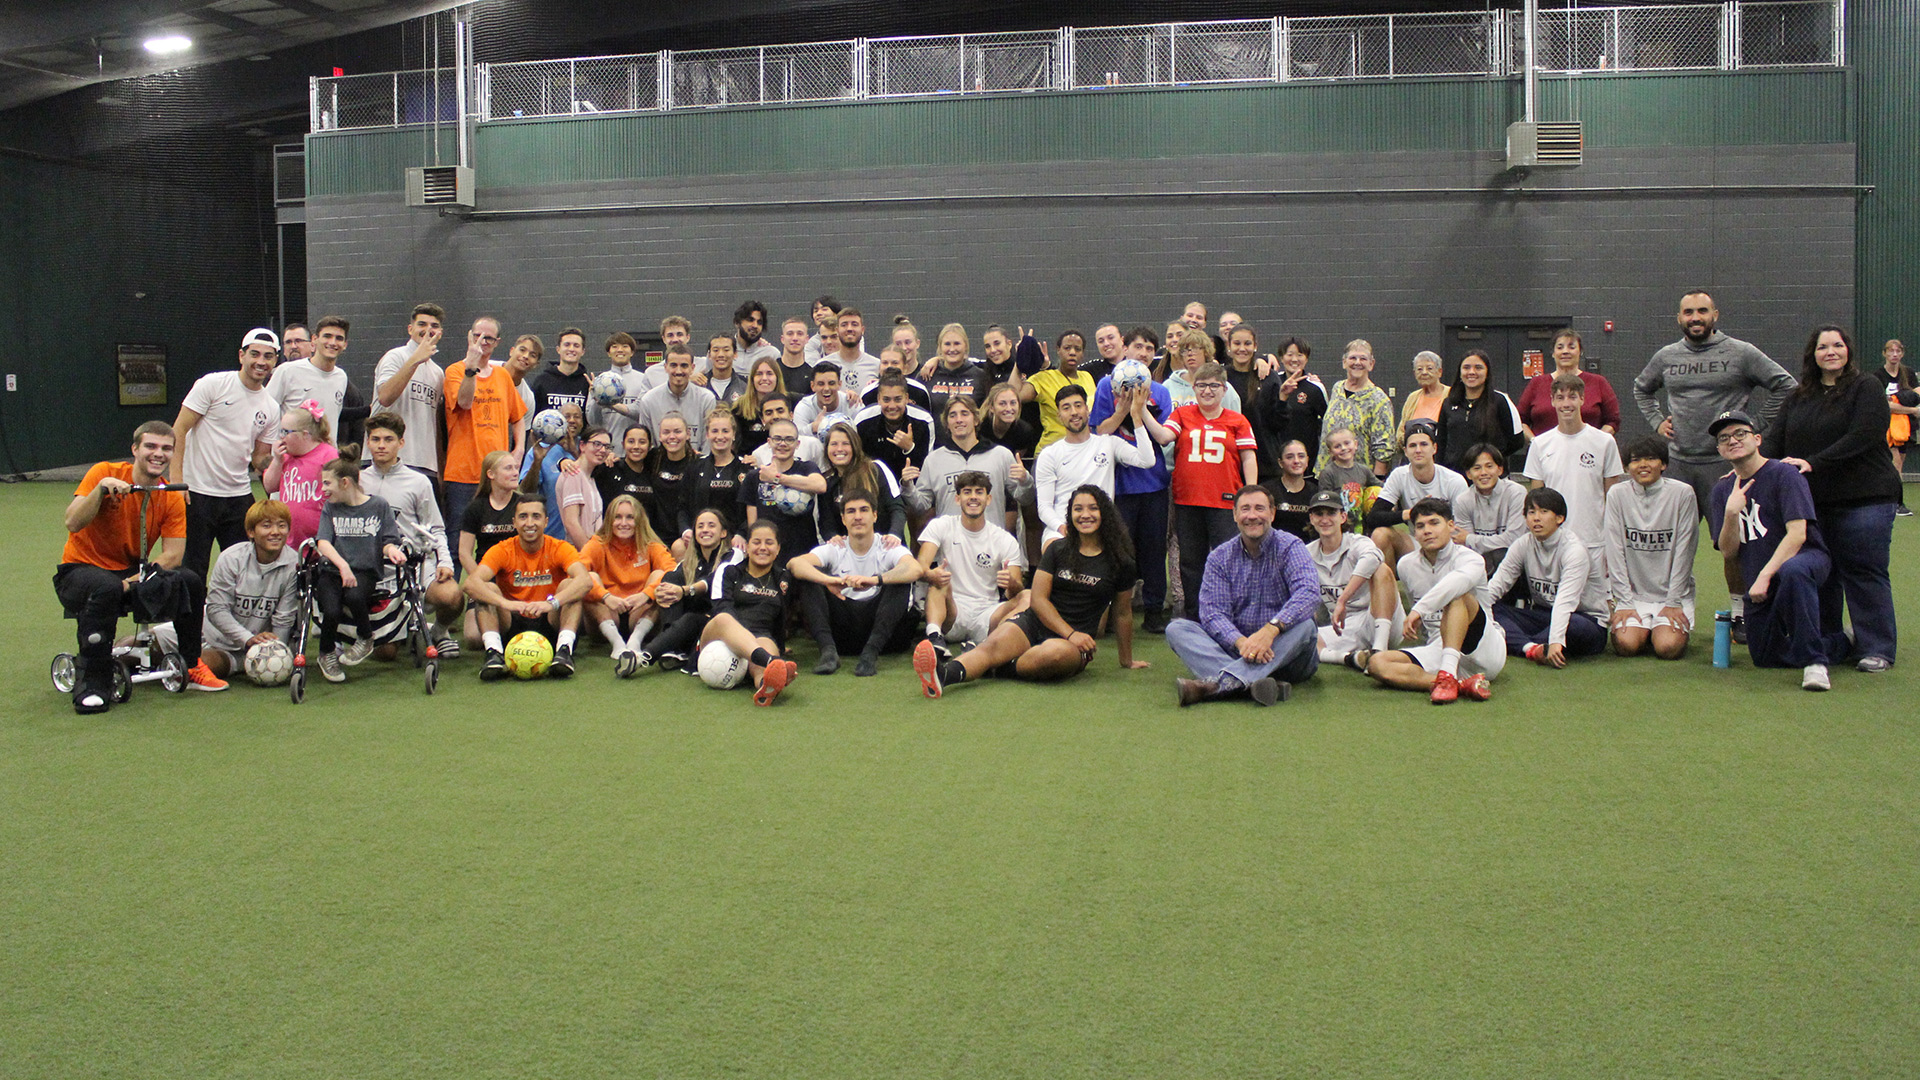 Tiger soccer teams conduct a clinic for special needs individuals